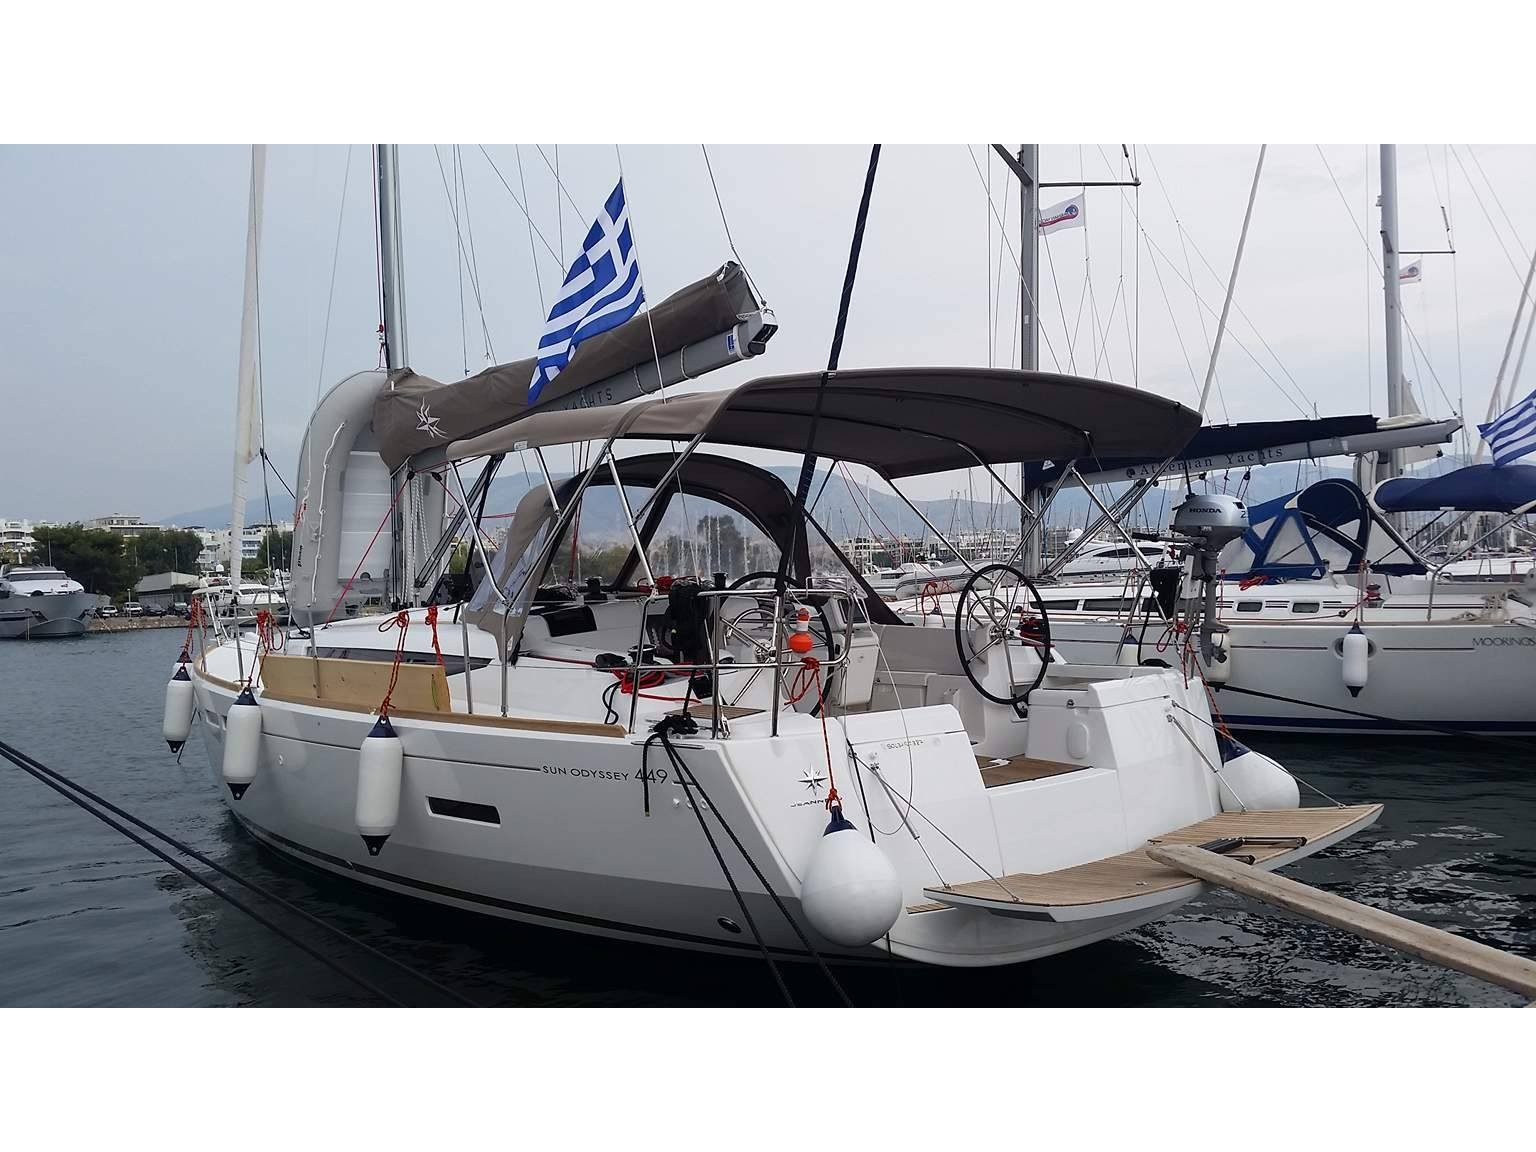 Sun Odyssey 449 - Yacht Charter Grand Union Canal & Boat hire in Greece Cyclades Islands Paros Paros Piso Livadi Port 3